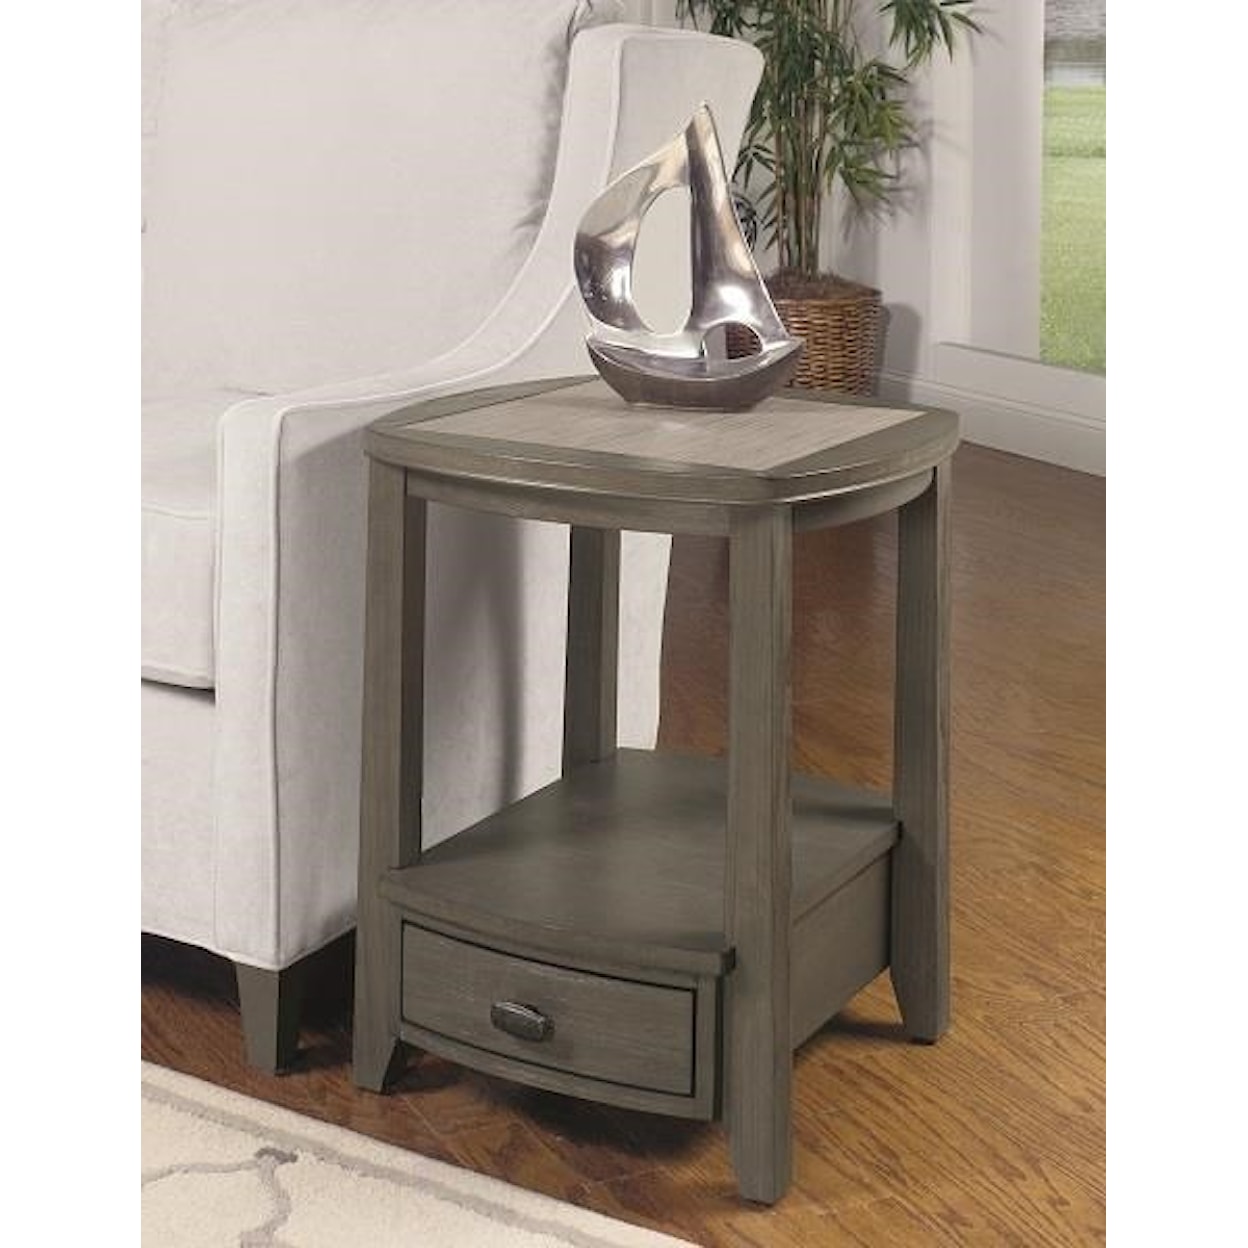 Null Furniture 2217 Squircle End Table